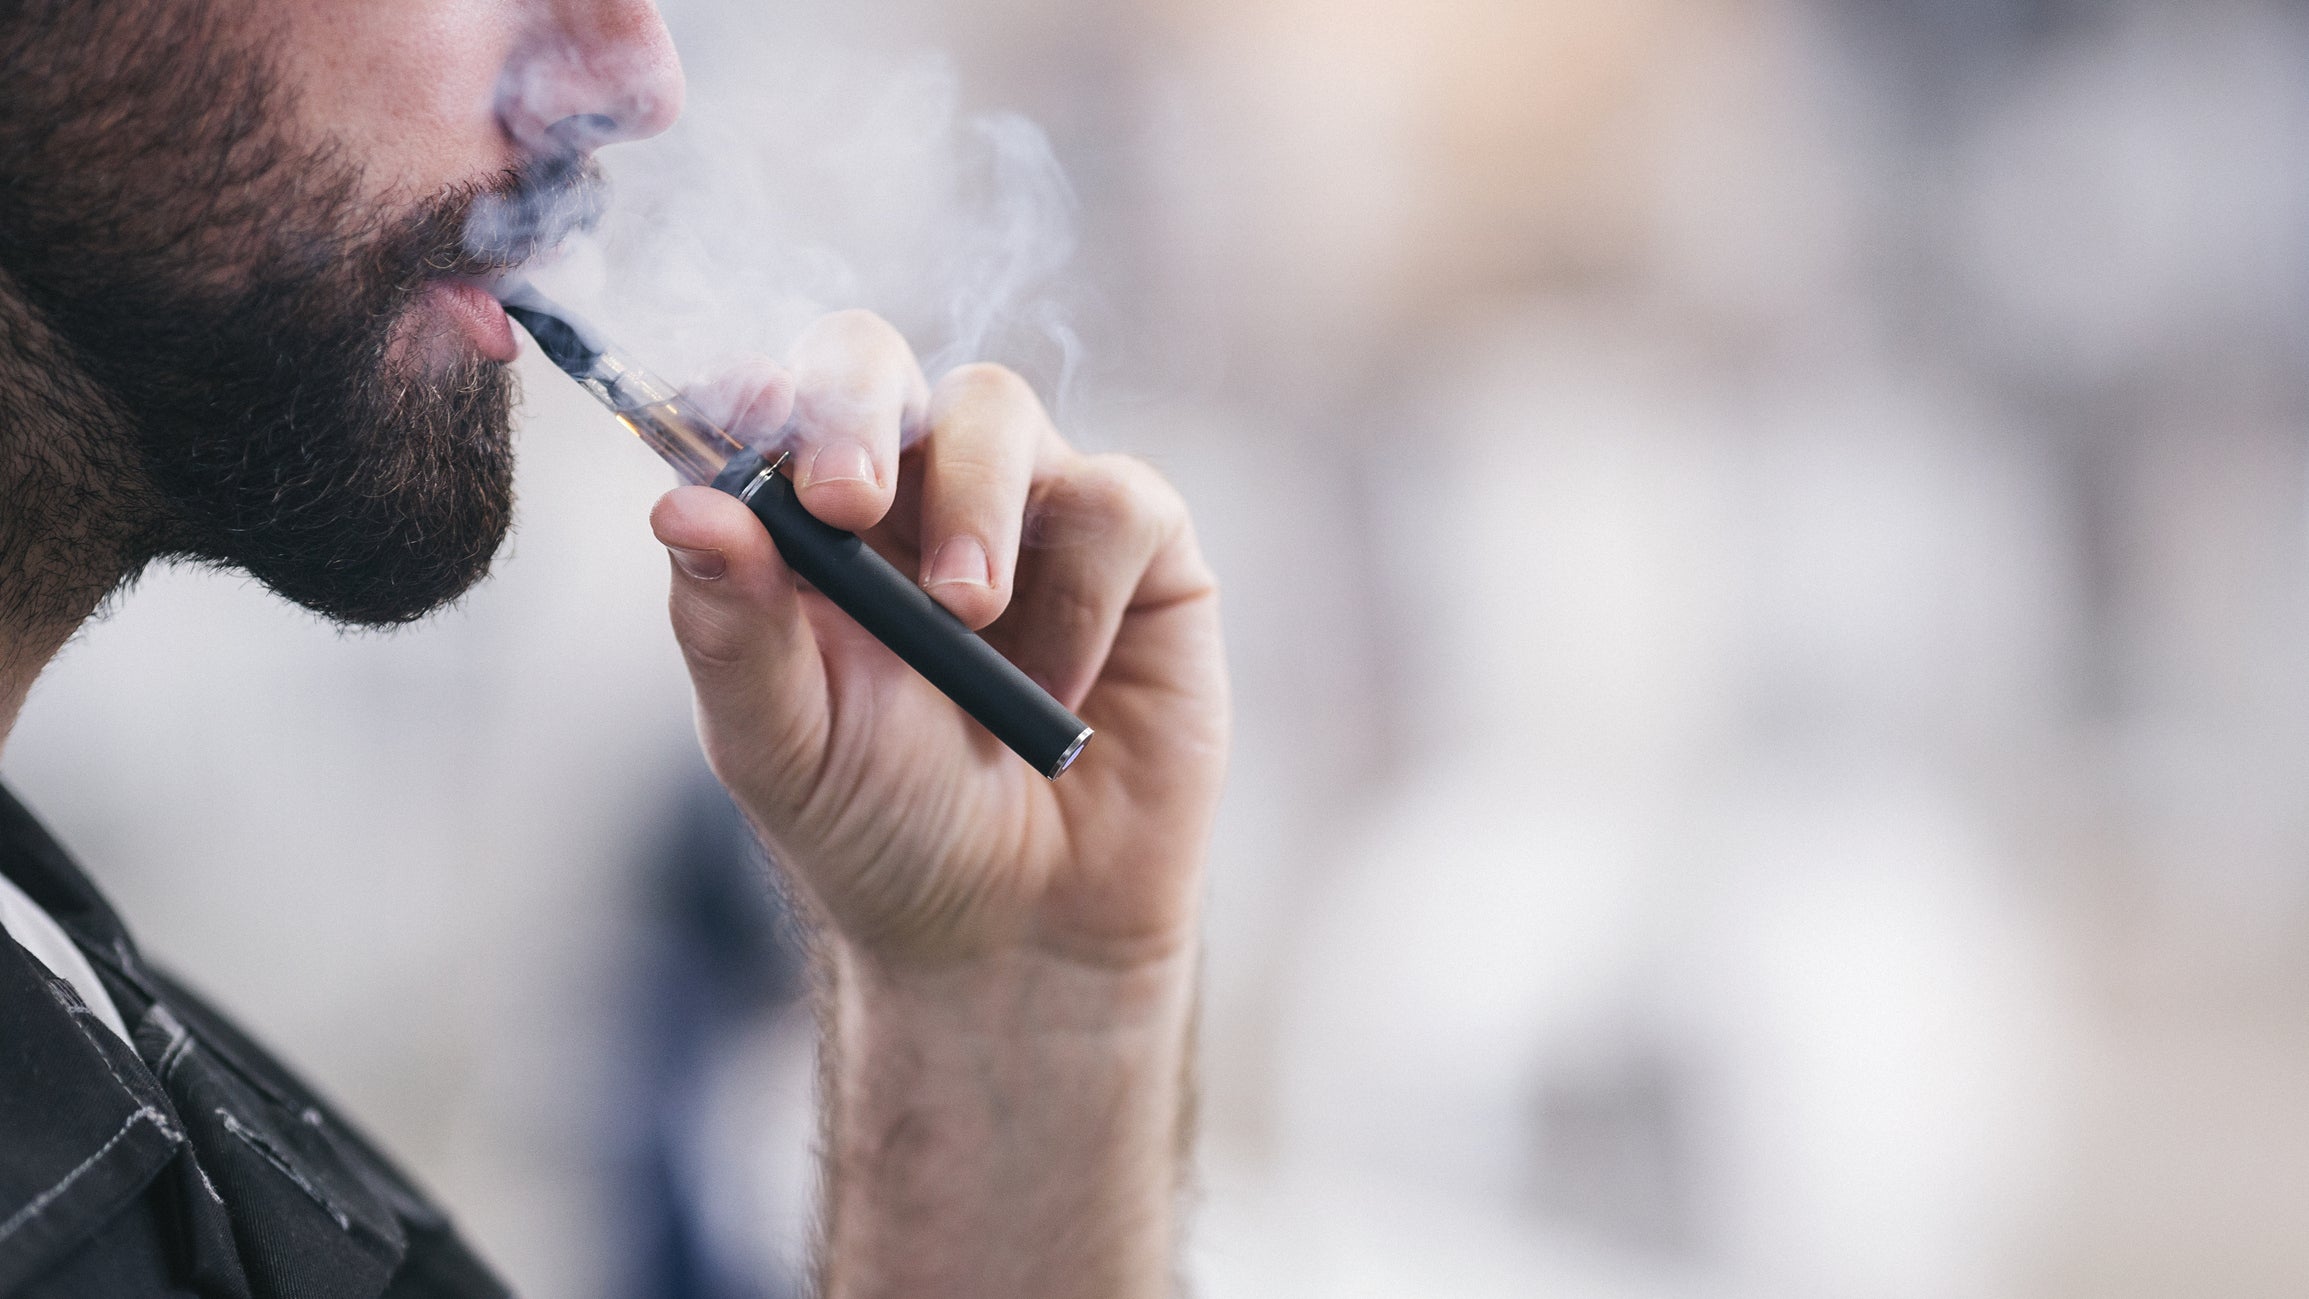 ‘Having a ban on vapes and flavours could have a negative impact on those who are attempting to quit’